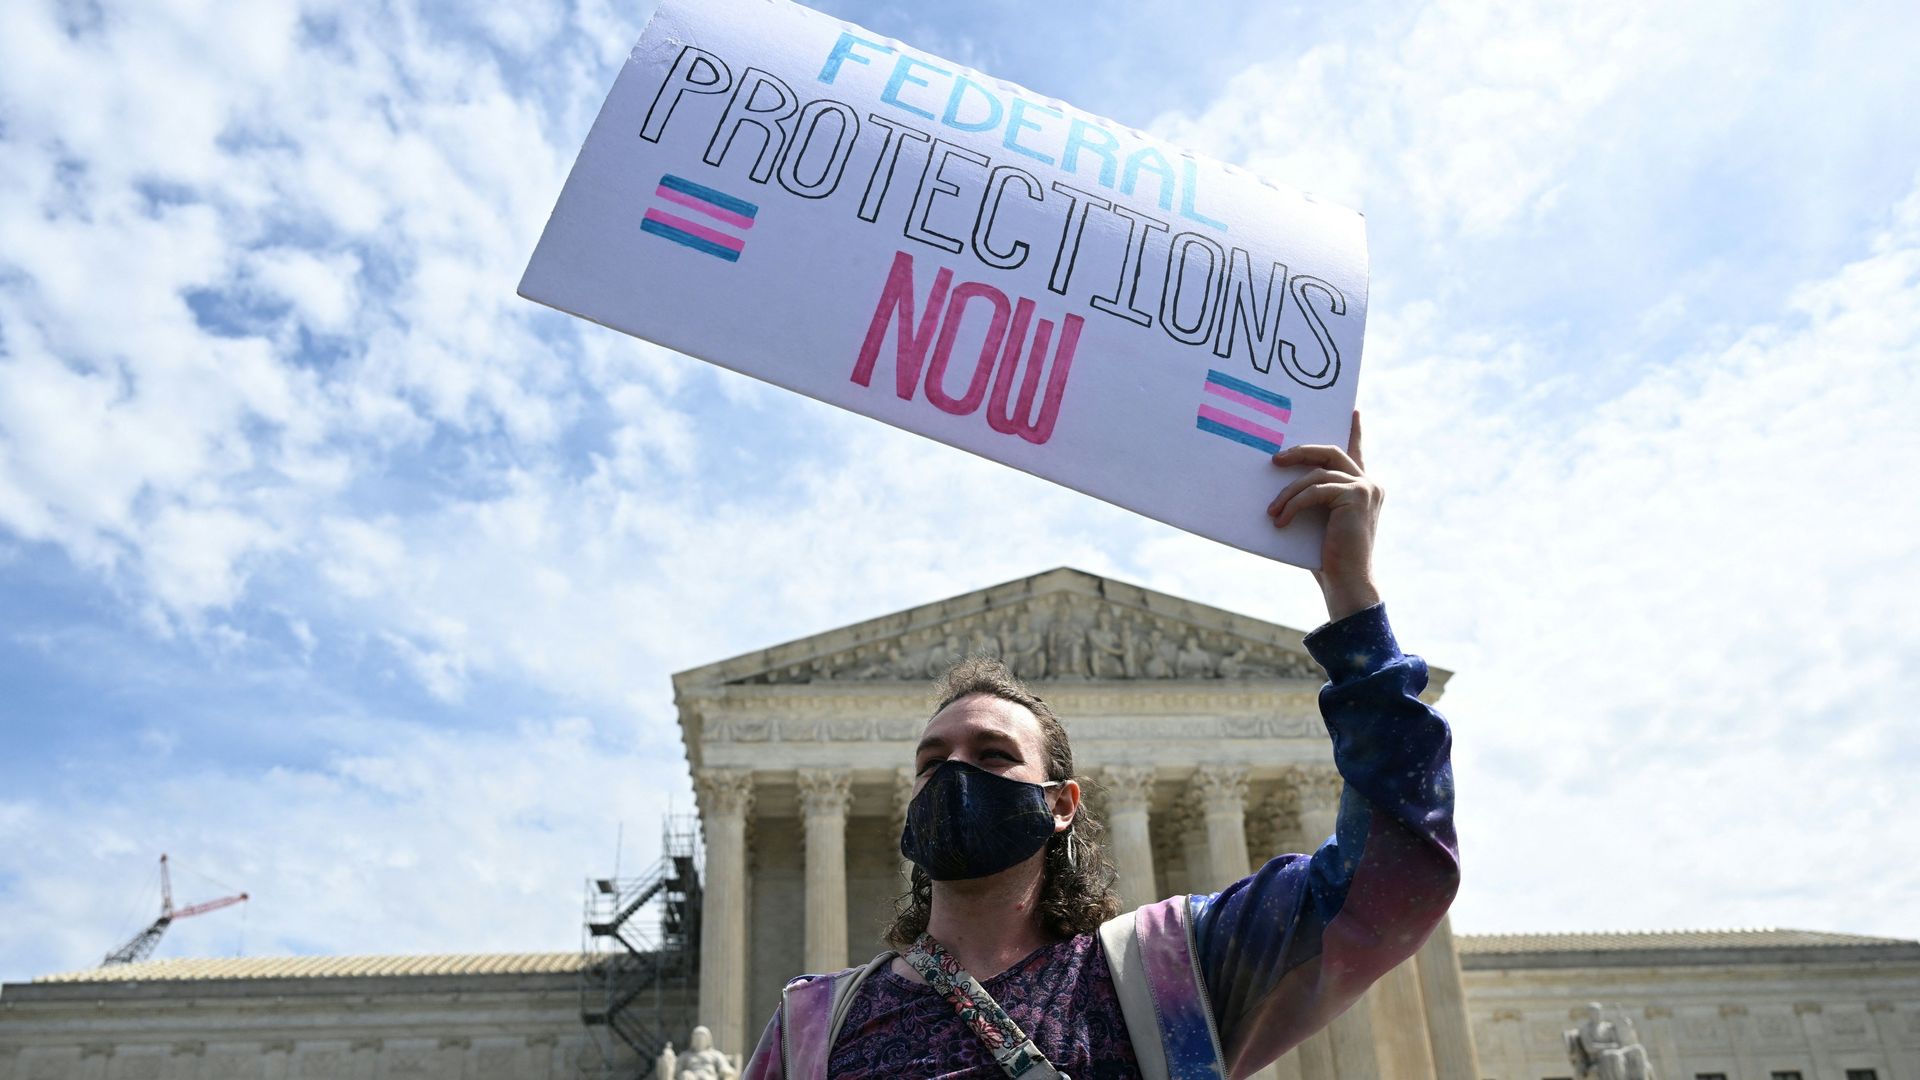 Photo of a protester holding a sign that has the trans flag and says "Federal protections now" outside the Supreme Court building